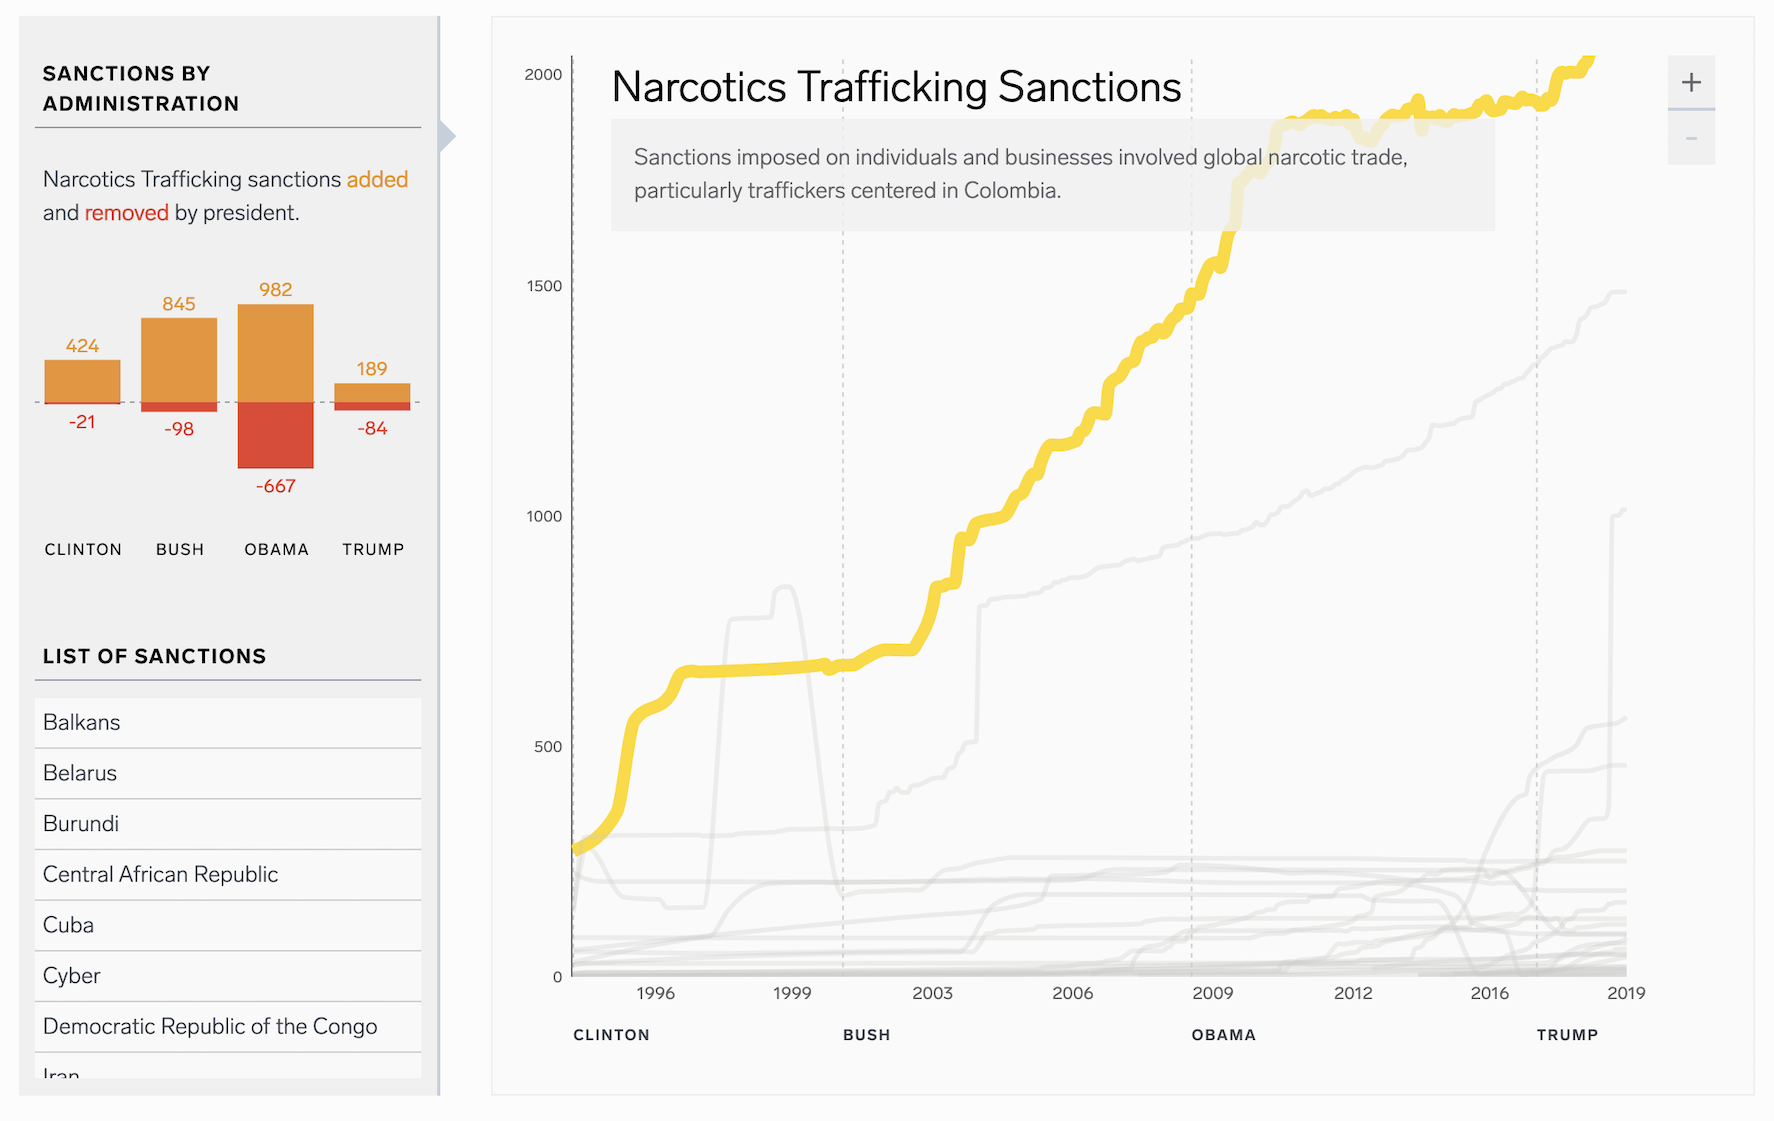 An image of two different graphs. On the left there is a Sanctions By Administration graph demonstrating the Narcotics Trafficking sanctions added (orange) and removed (red) under Clinton, Bush, Obama and Trump. With the top of a list of scrollable sanctions visible showing Balkans, Belarus, Burundi, Central African Republic, Cuba, Cyber, Demoncratic Republic of the Congo. On the right there is a line graph titled "Narcotics Trafficking Sanctions" the subtext reads Sanctions imposed on individuals and businesses involved global narcotic trade, particularly traffickers centered in Colombia. The x-axis reflects the aforementioned presents and the years of their terms. The y-axis shows the numbers 0, 500, 1000, 1500, 2000. The yellow line in the graph shows a steep rise from 250 to over 2000 over the span of time from 1996-2019.